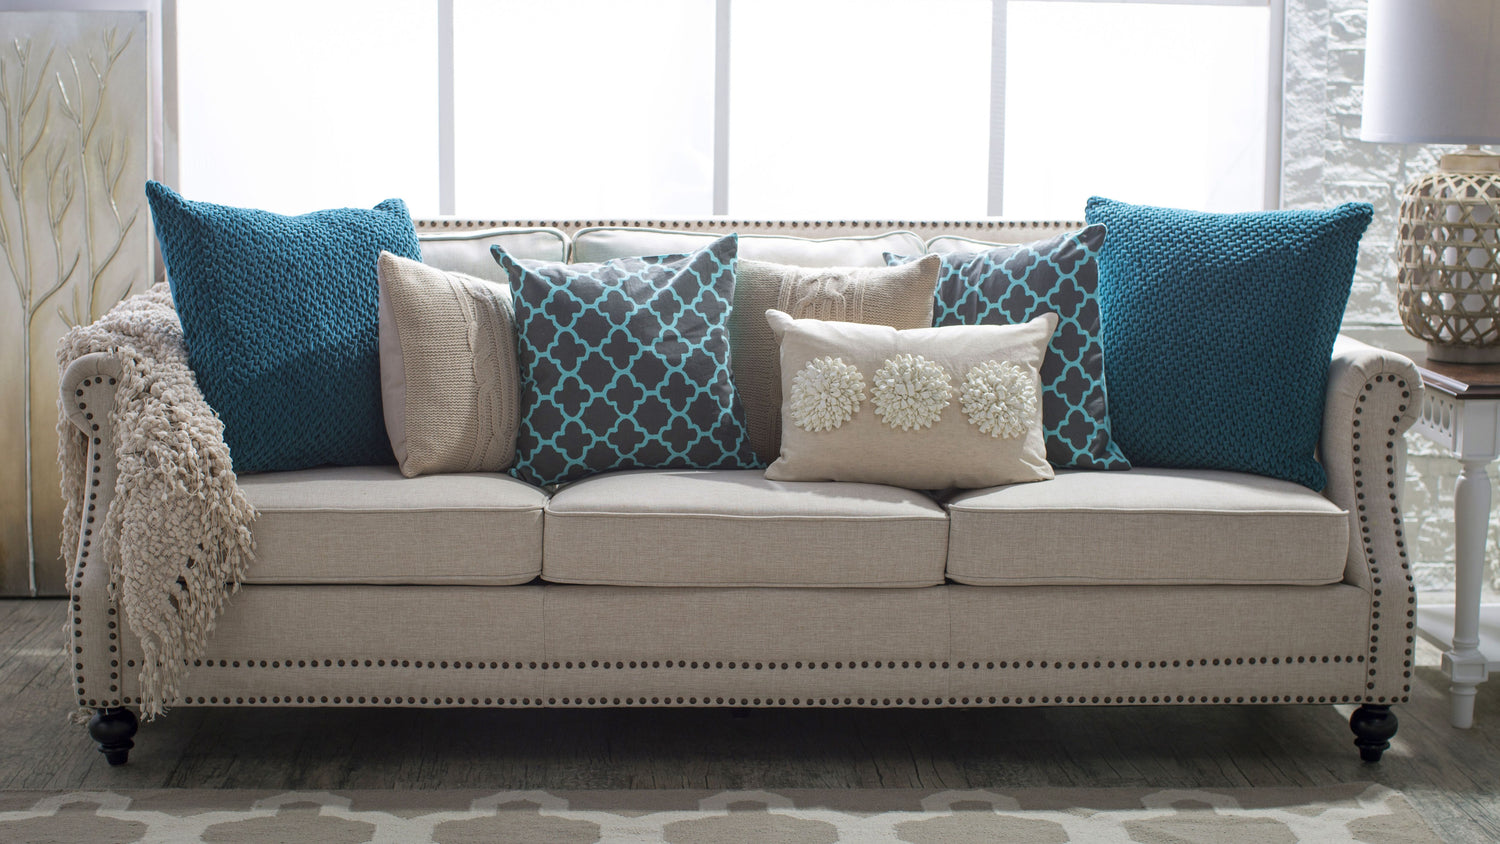 A beige sofa adorned with nailhead trim is decorated with an assortment of throw pillows in shades of teal and beige. The pillows feature various textures and patterns, including solid knits, geometric designs, and floral accents. A knit throw is draped on one armrest.